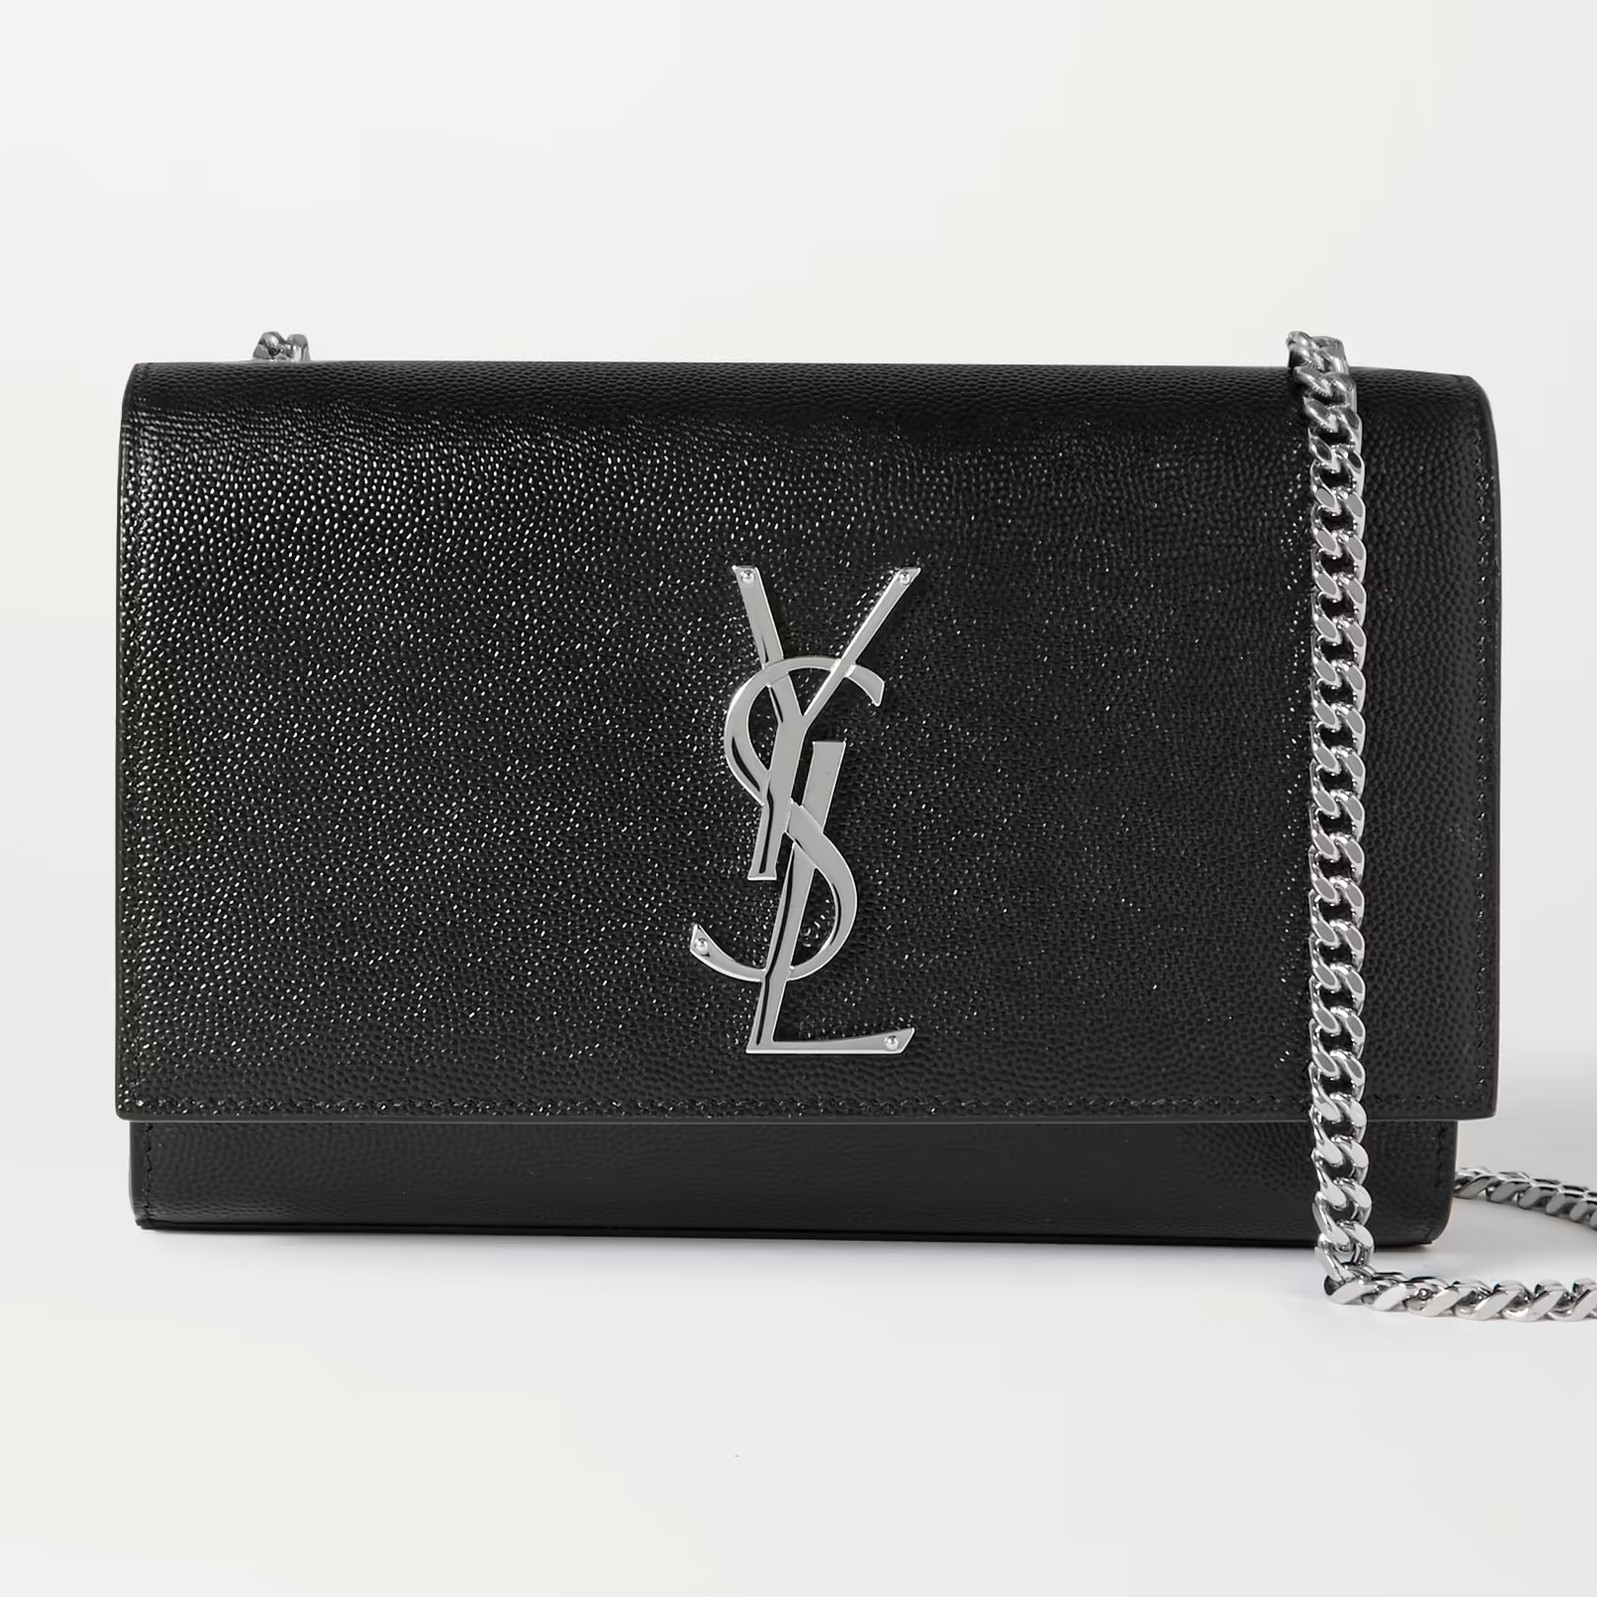 TÚI ĐEO CHÉO NỮ YSL SAINT LAURENT KATE SMALL TEXTURED LEATHER SHOULDER BAG IN BLACK 5